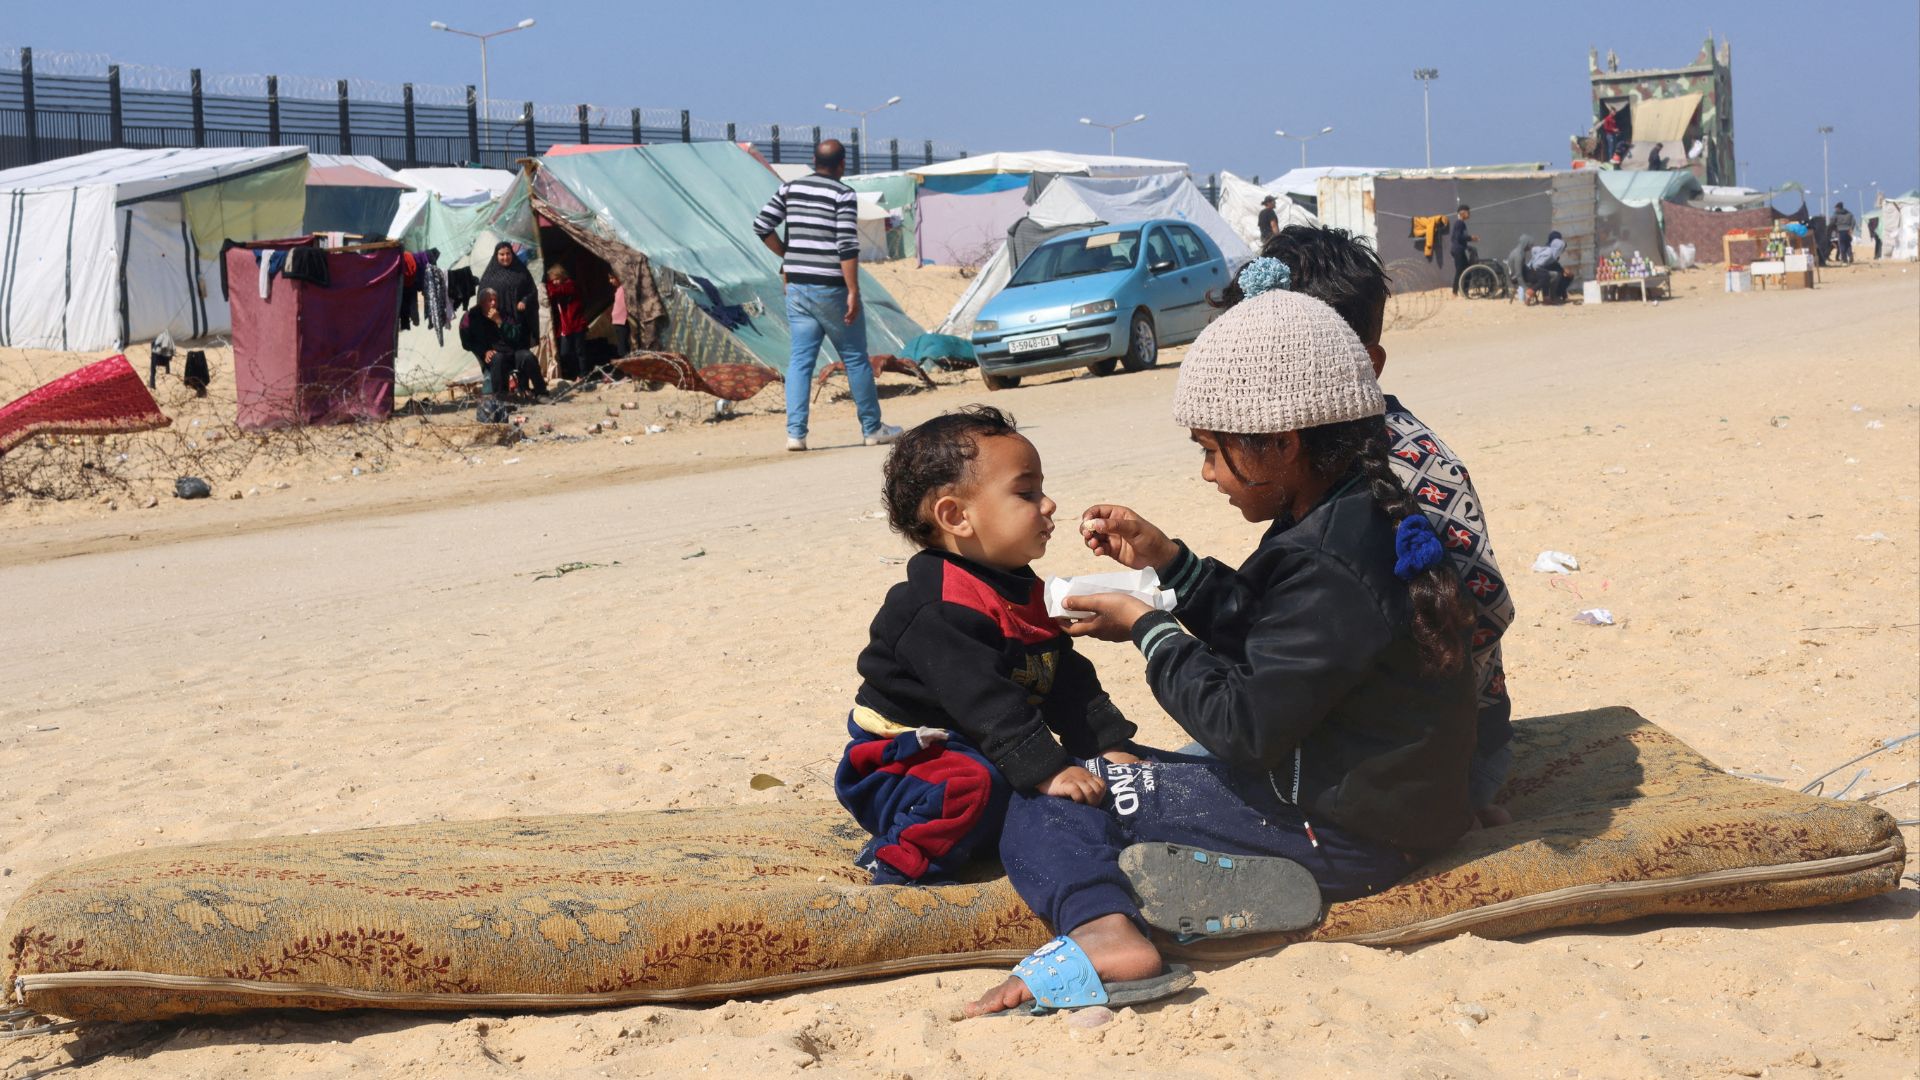 Displaced Palestinian girl, who fled her house due to Israeli strikes, feeds her brother at a tent camp, near the border with Egypt, in Rafah. /Saleh Salem/Reuters